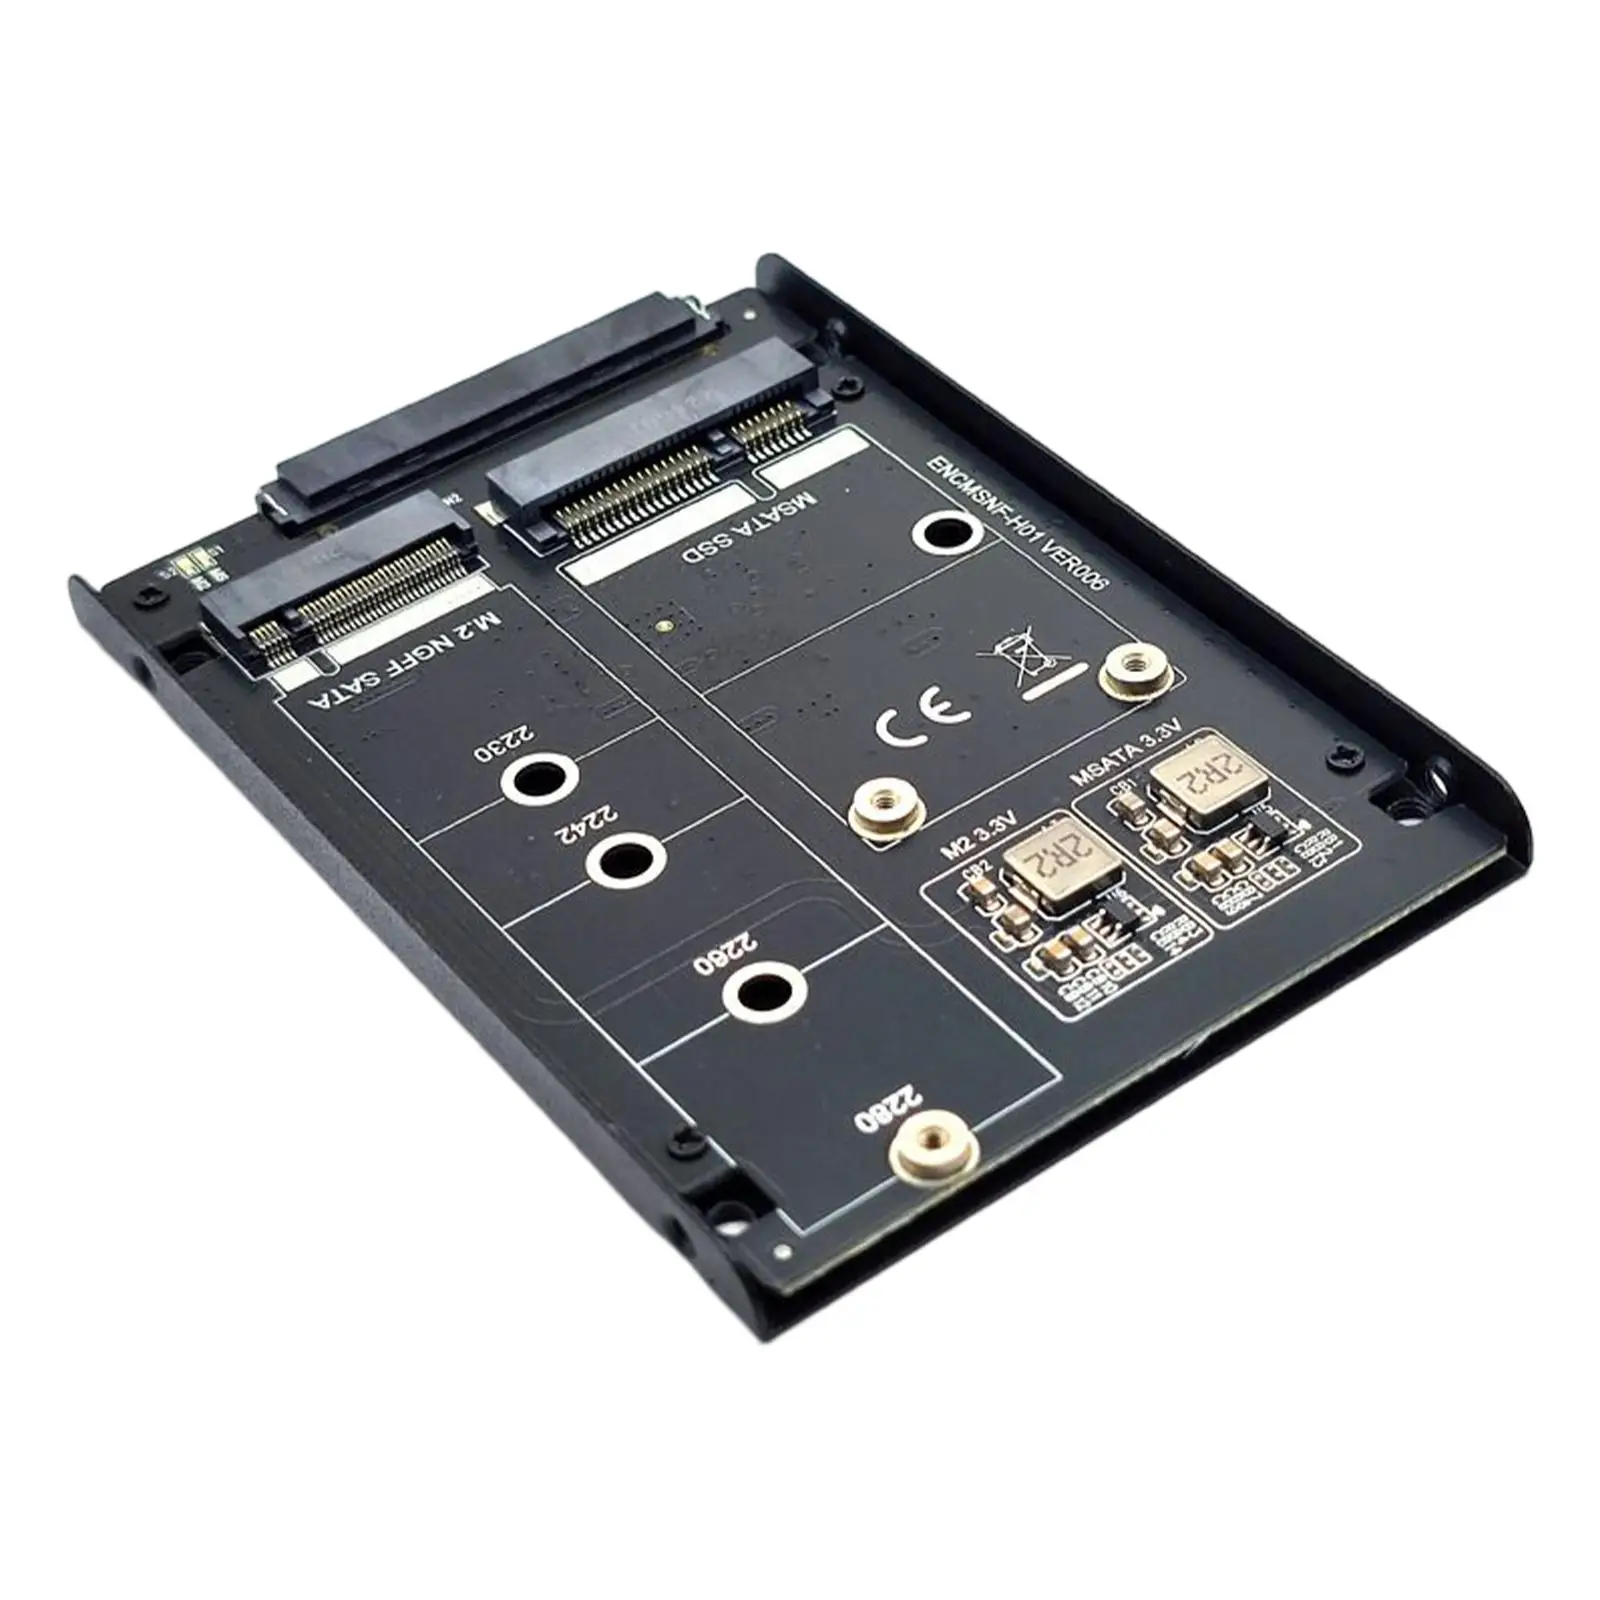 Adapter Card Connector Stable Transmission Expansion Card Transfer Card M.2 mSATA to SATA 22Pin for Assembly Desktop PC Fittings